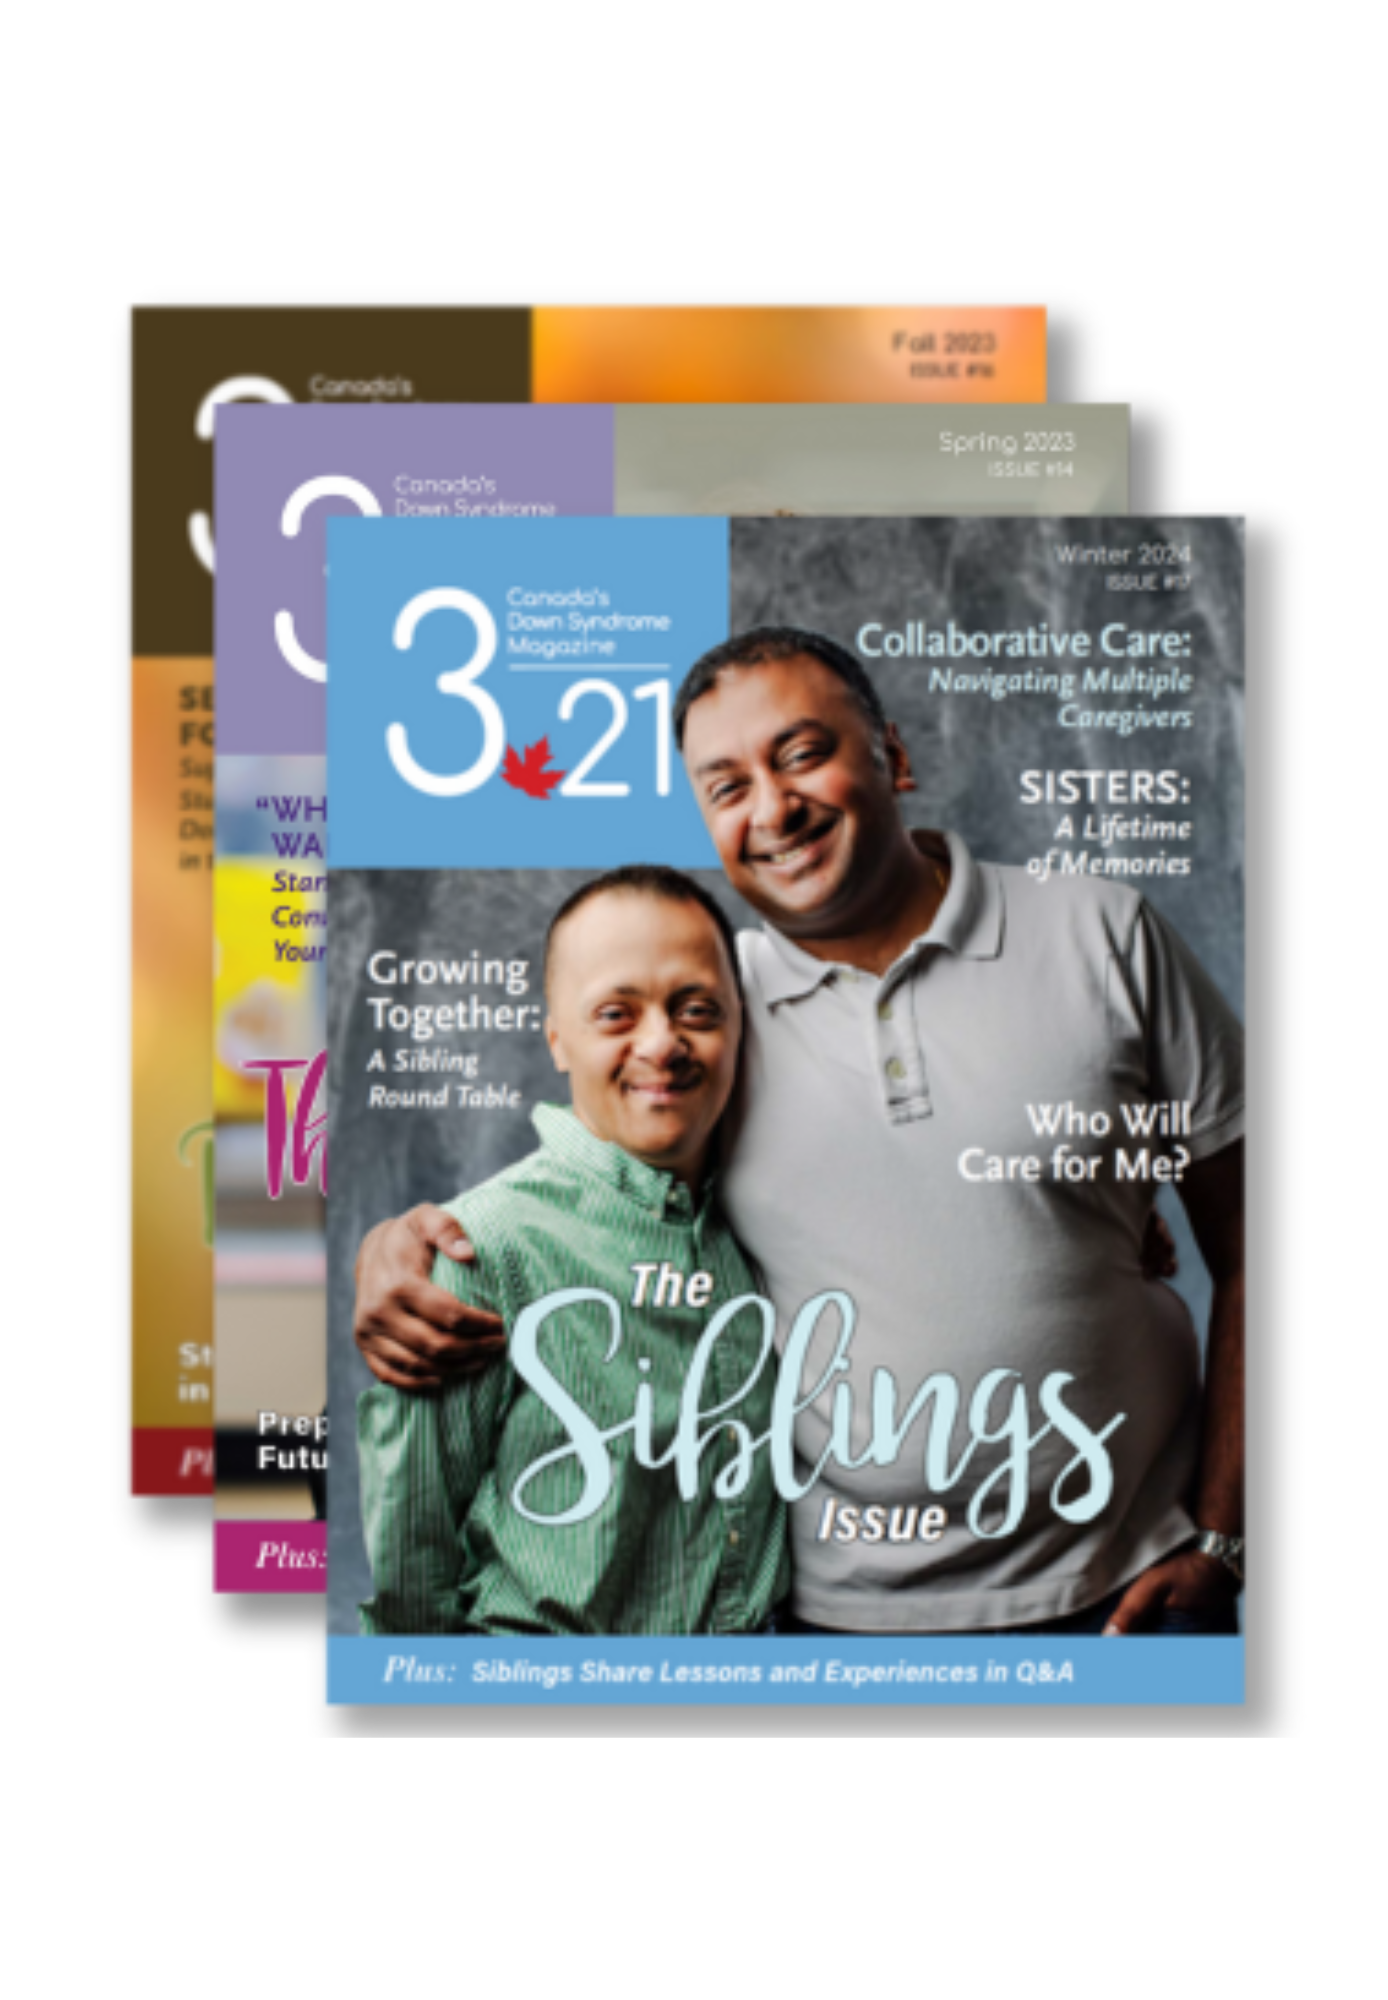 Resources like 3.21 Canada's Down Syndrome Magazine